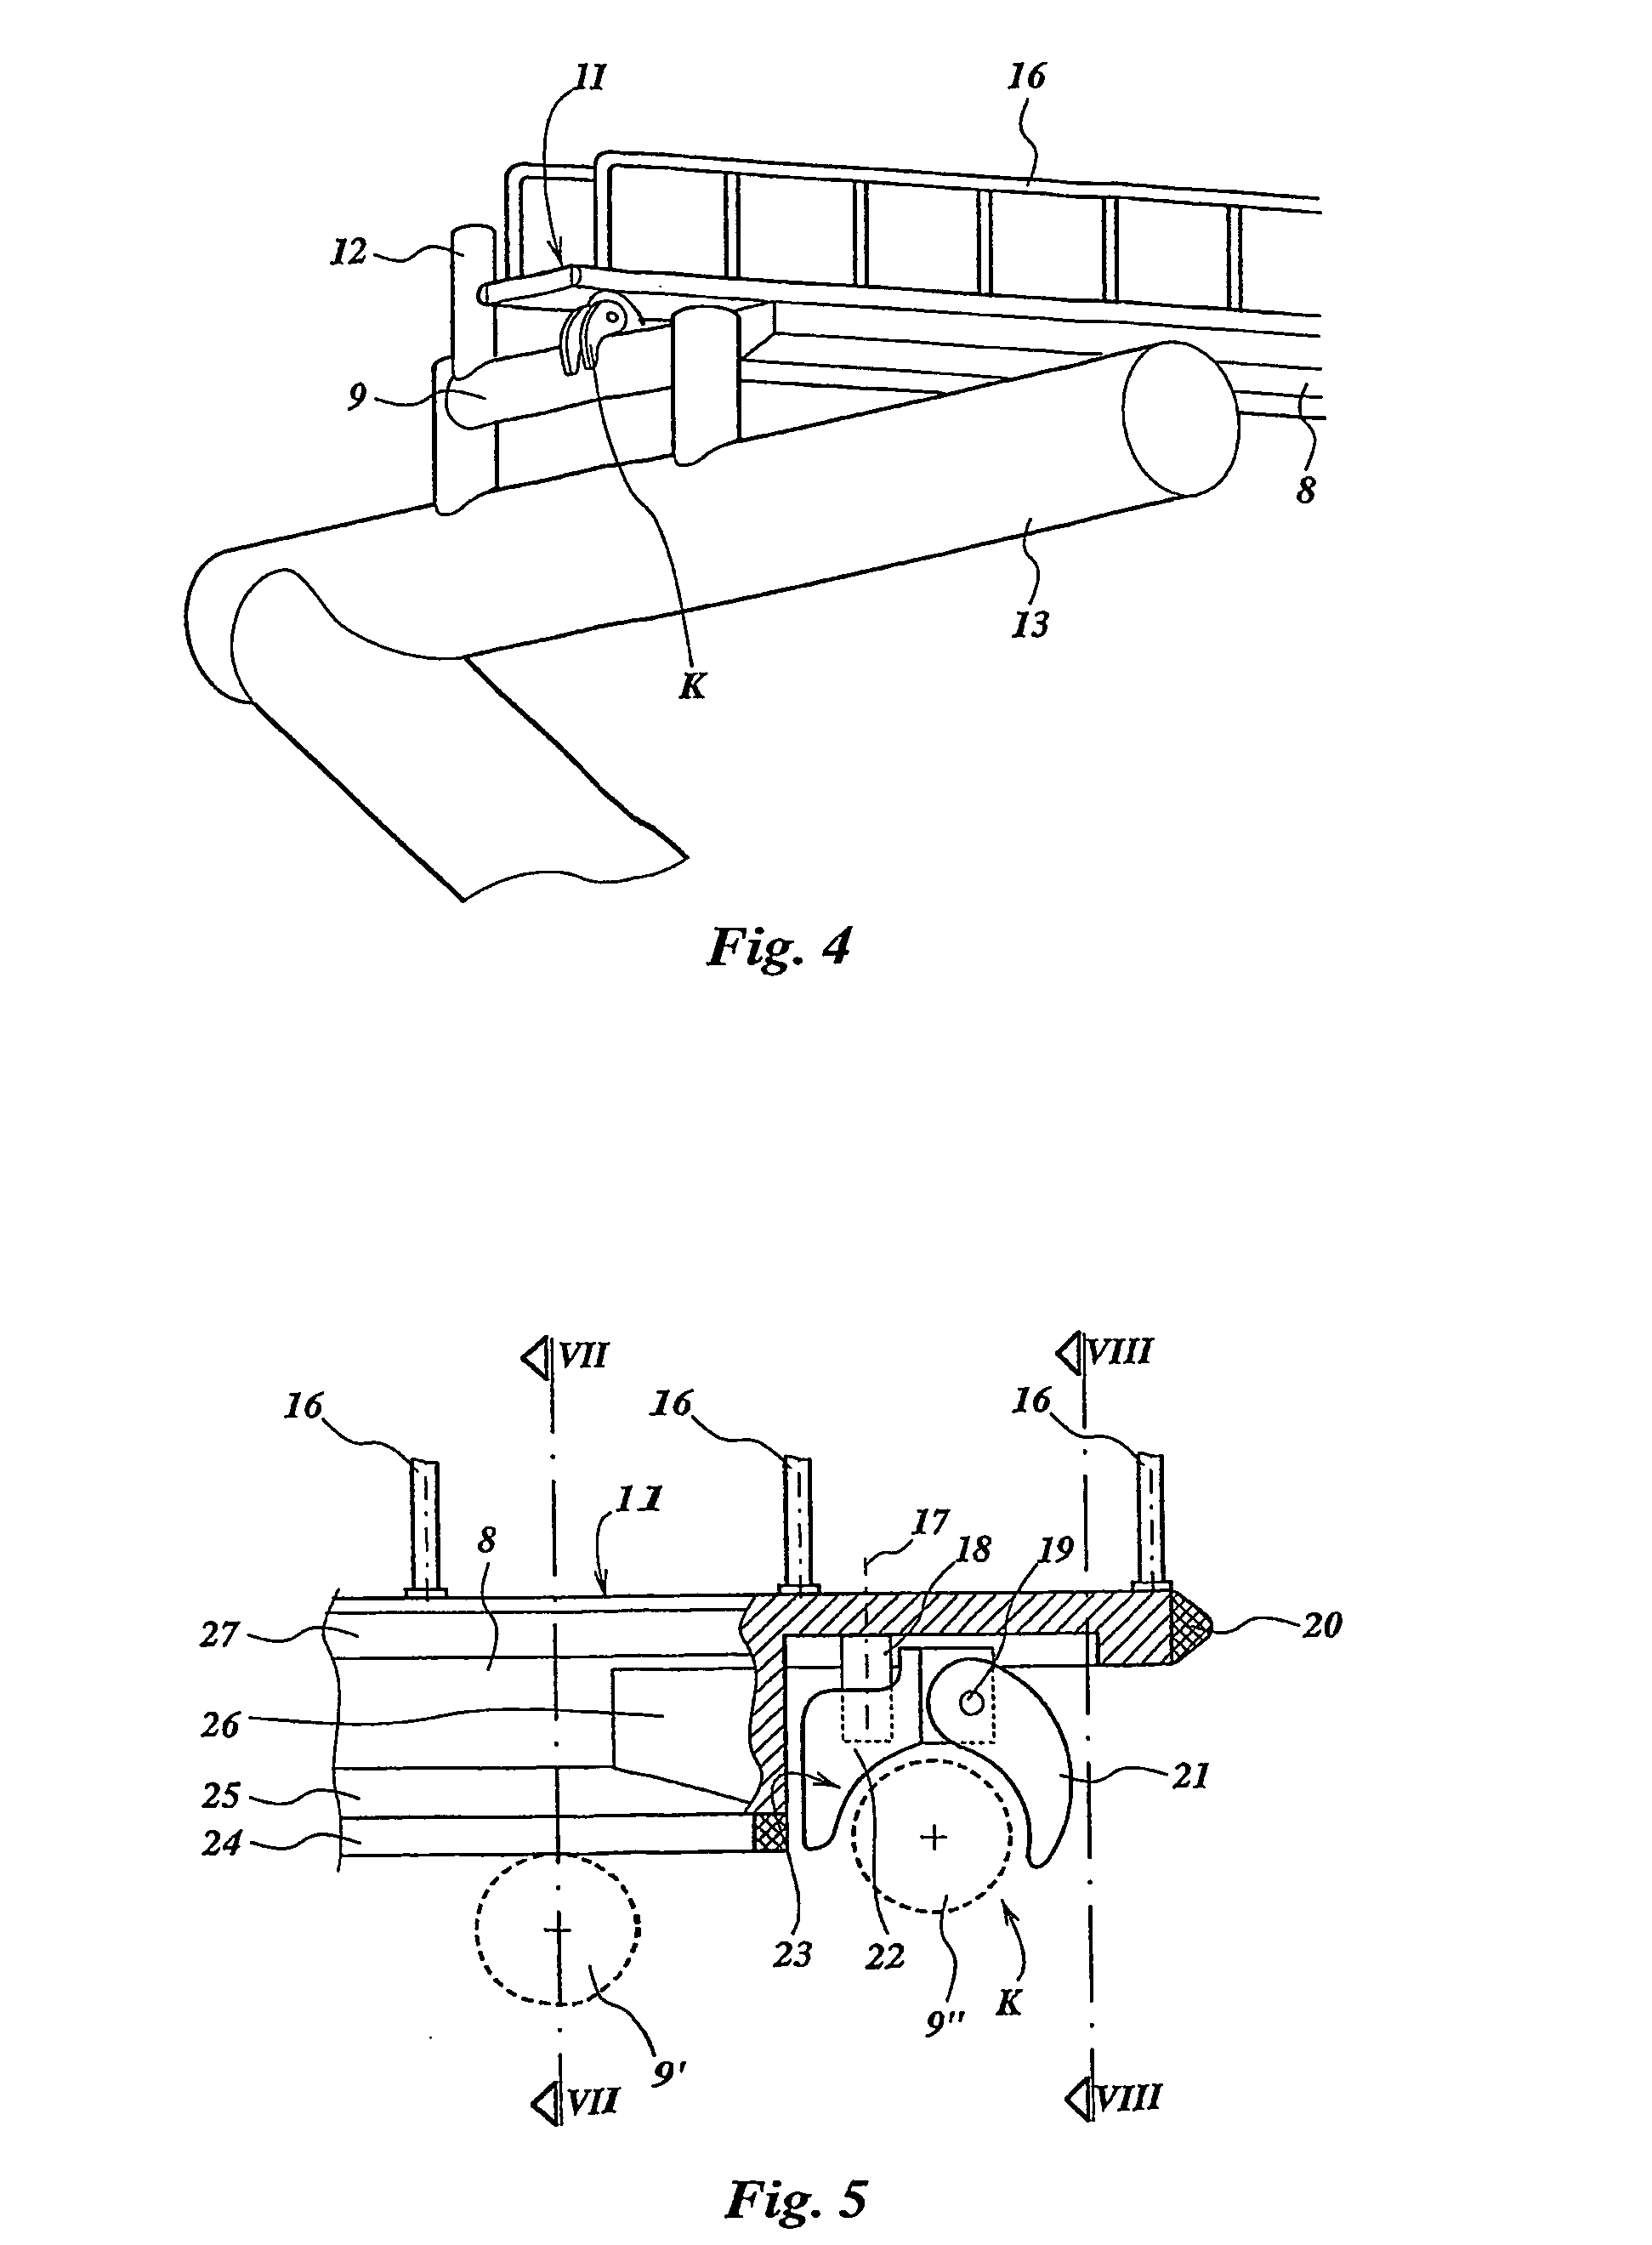 Device and Method for Coupling a Vessel to a Stationary Object